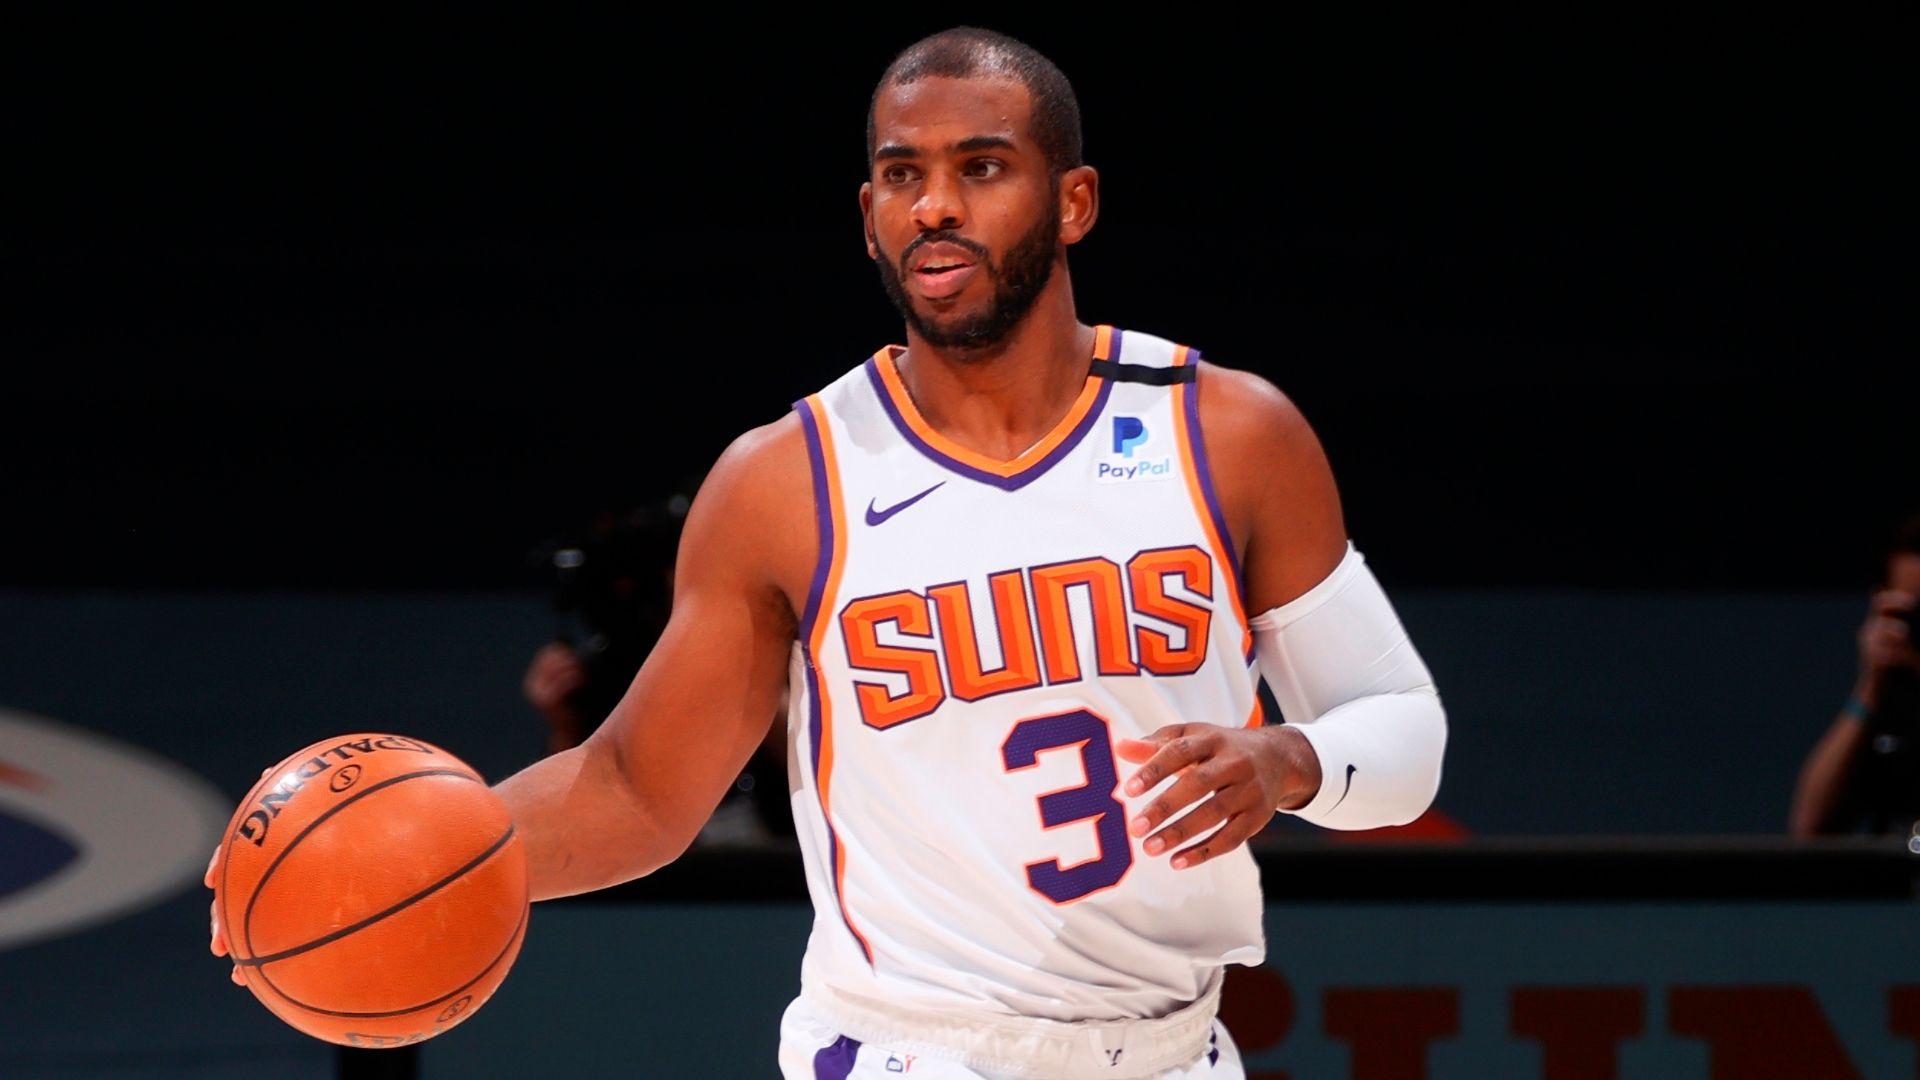 Chris Paul: The Point God who refuses to slow down. NBA.com India. The official site of